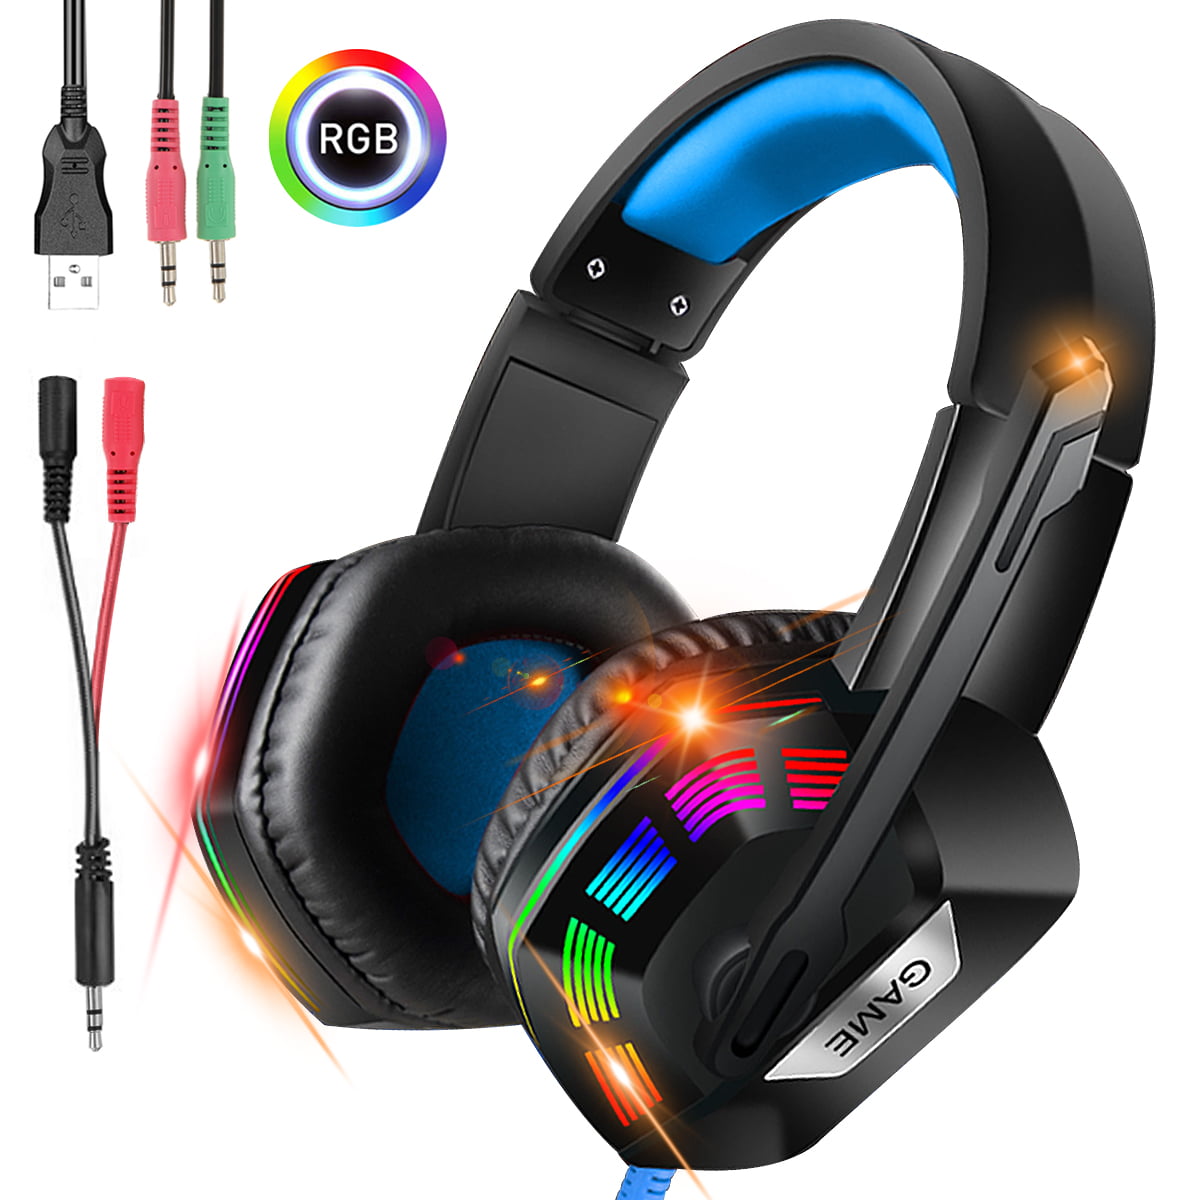 Gaming Headset with 360° Adjustable Microphone for PS4 Xbox Switch and PC, Stereo Bass 7.1 Surround Headphones with LED Wired Over-Ear Earmuffs for iPad Smart Phone Walmart.com